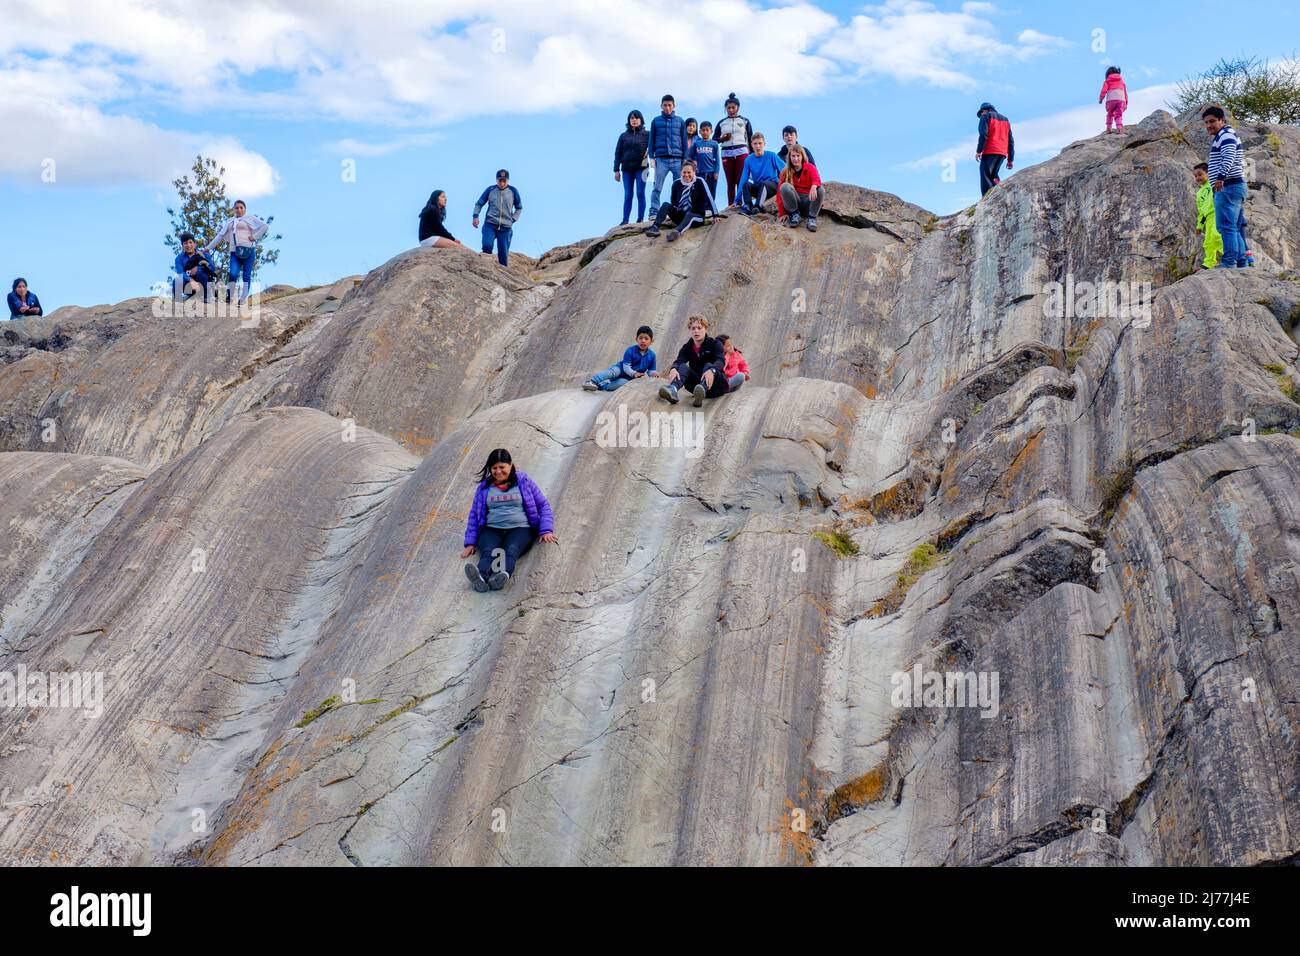 People playing at Sacsayhuaman fortress natural stone formation used as a slide, city of Cusco, Sacred Valley, Peru Stock Photo